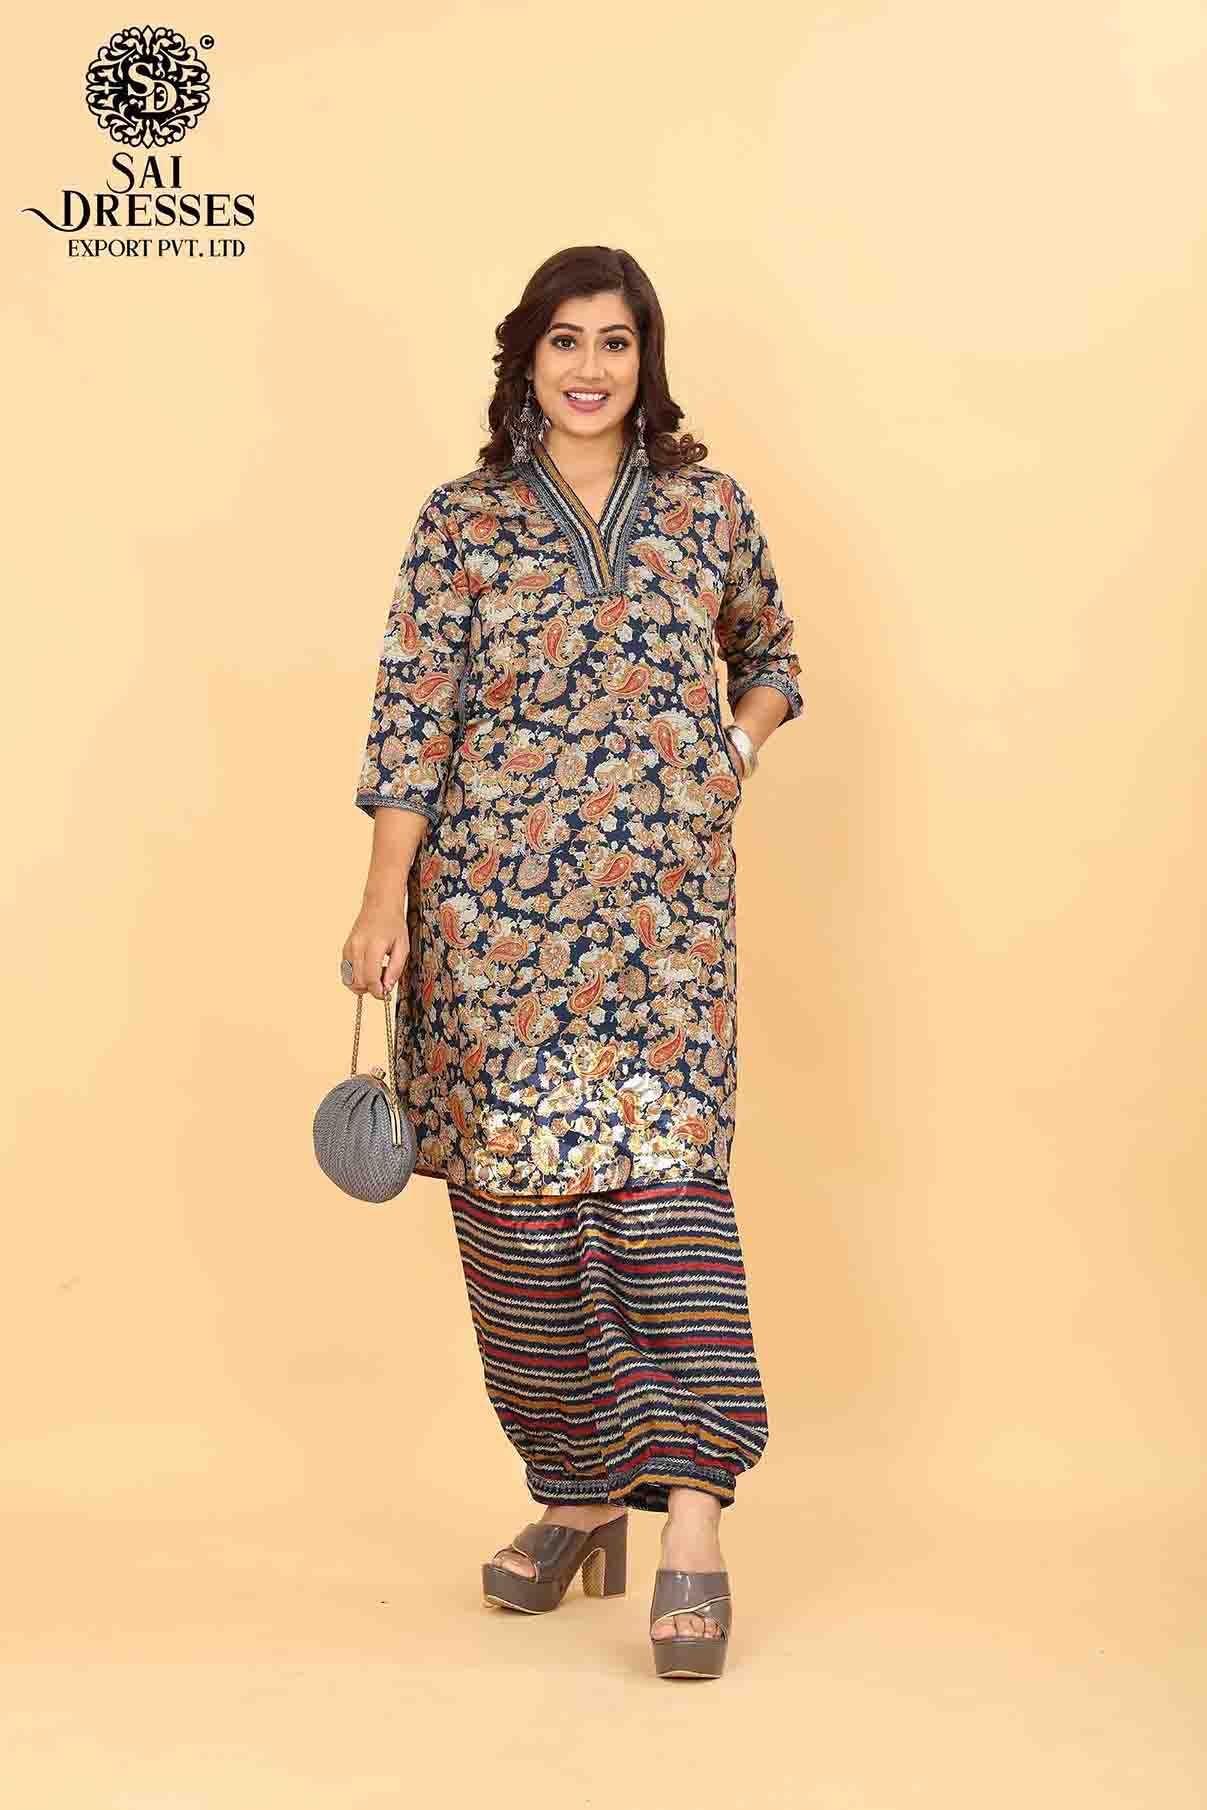 SAI DRESSES PRESENT D.NO SD 5011 READY TO EXCLUSIVE TRENDY WEAR PATHANI KURTA WITH AFGHANI PANT STYLE COMBO COLLECTION IN WHOLESALE RATE IN SURAT